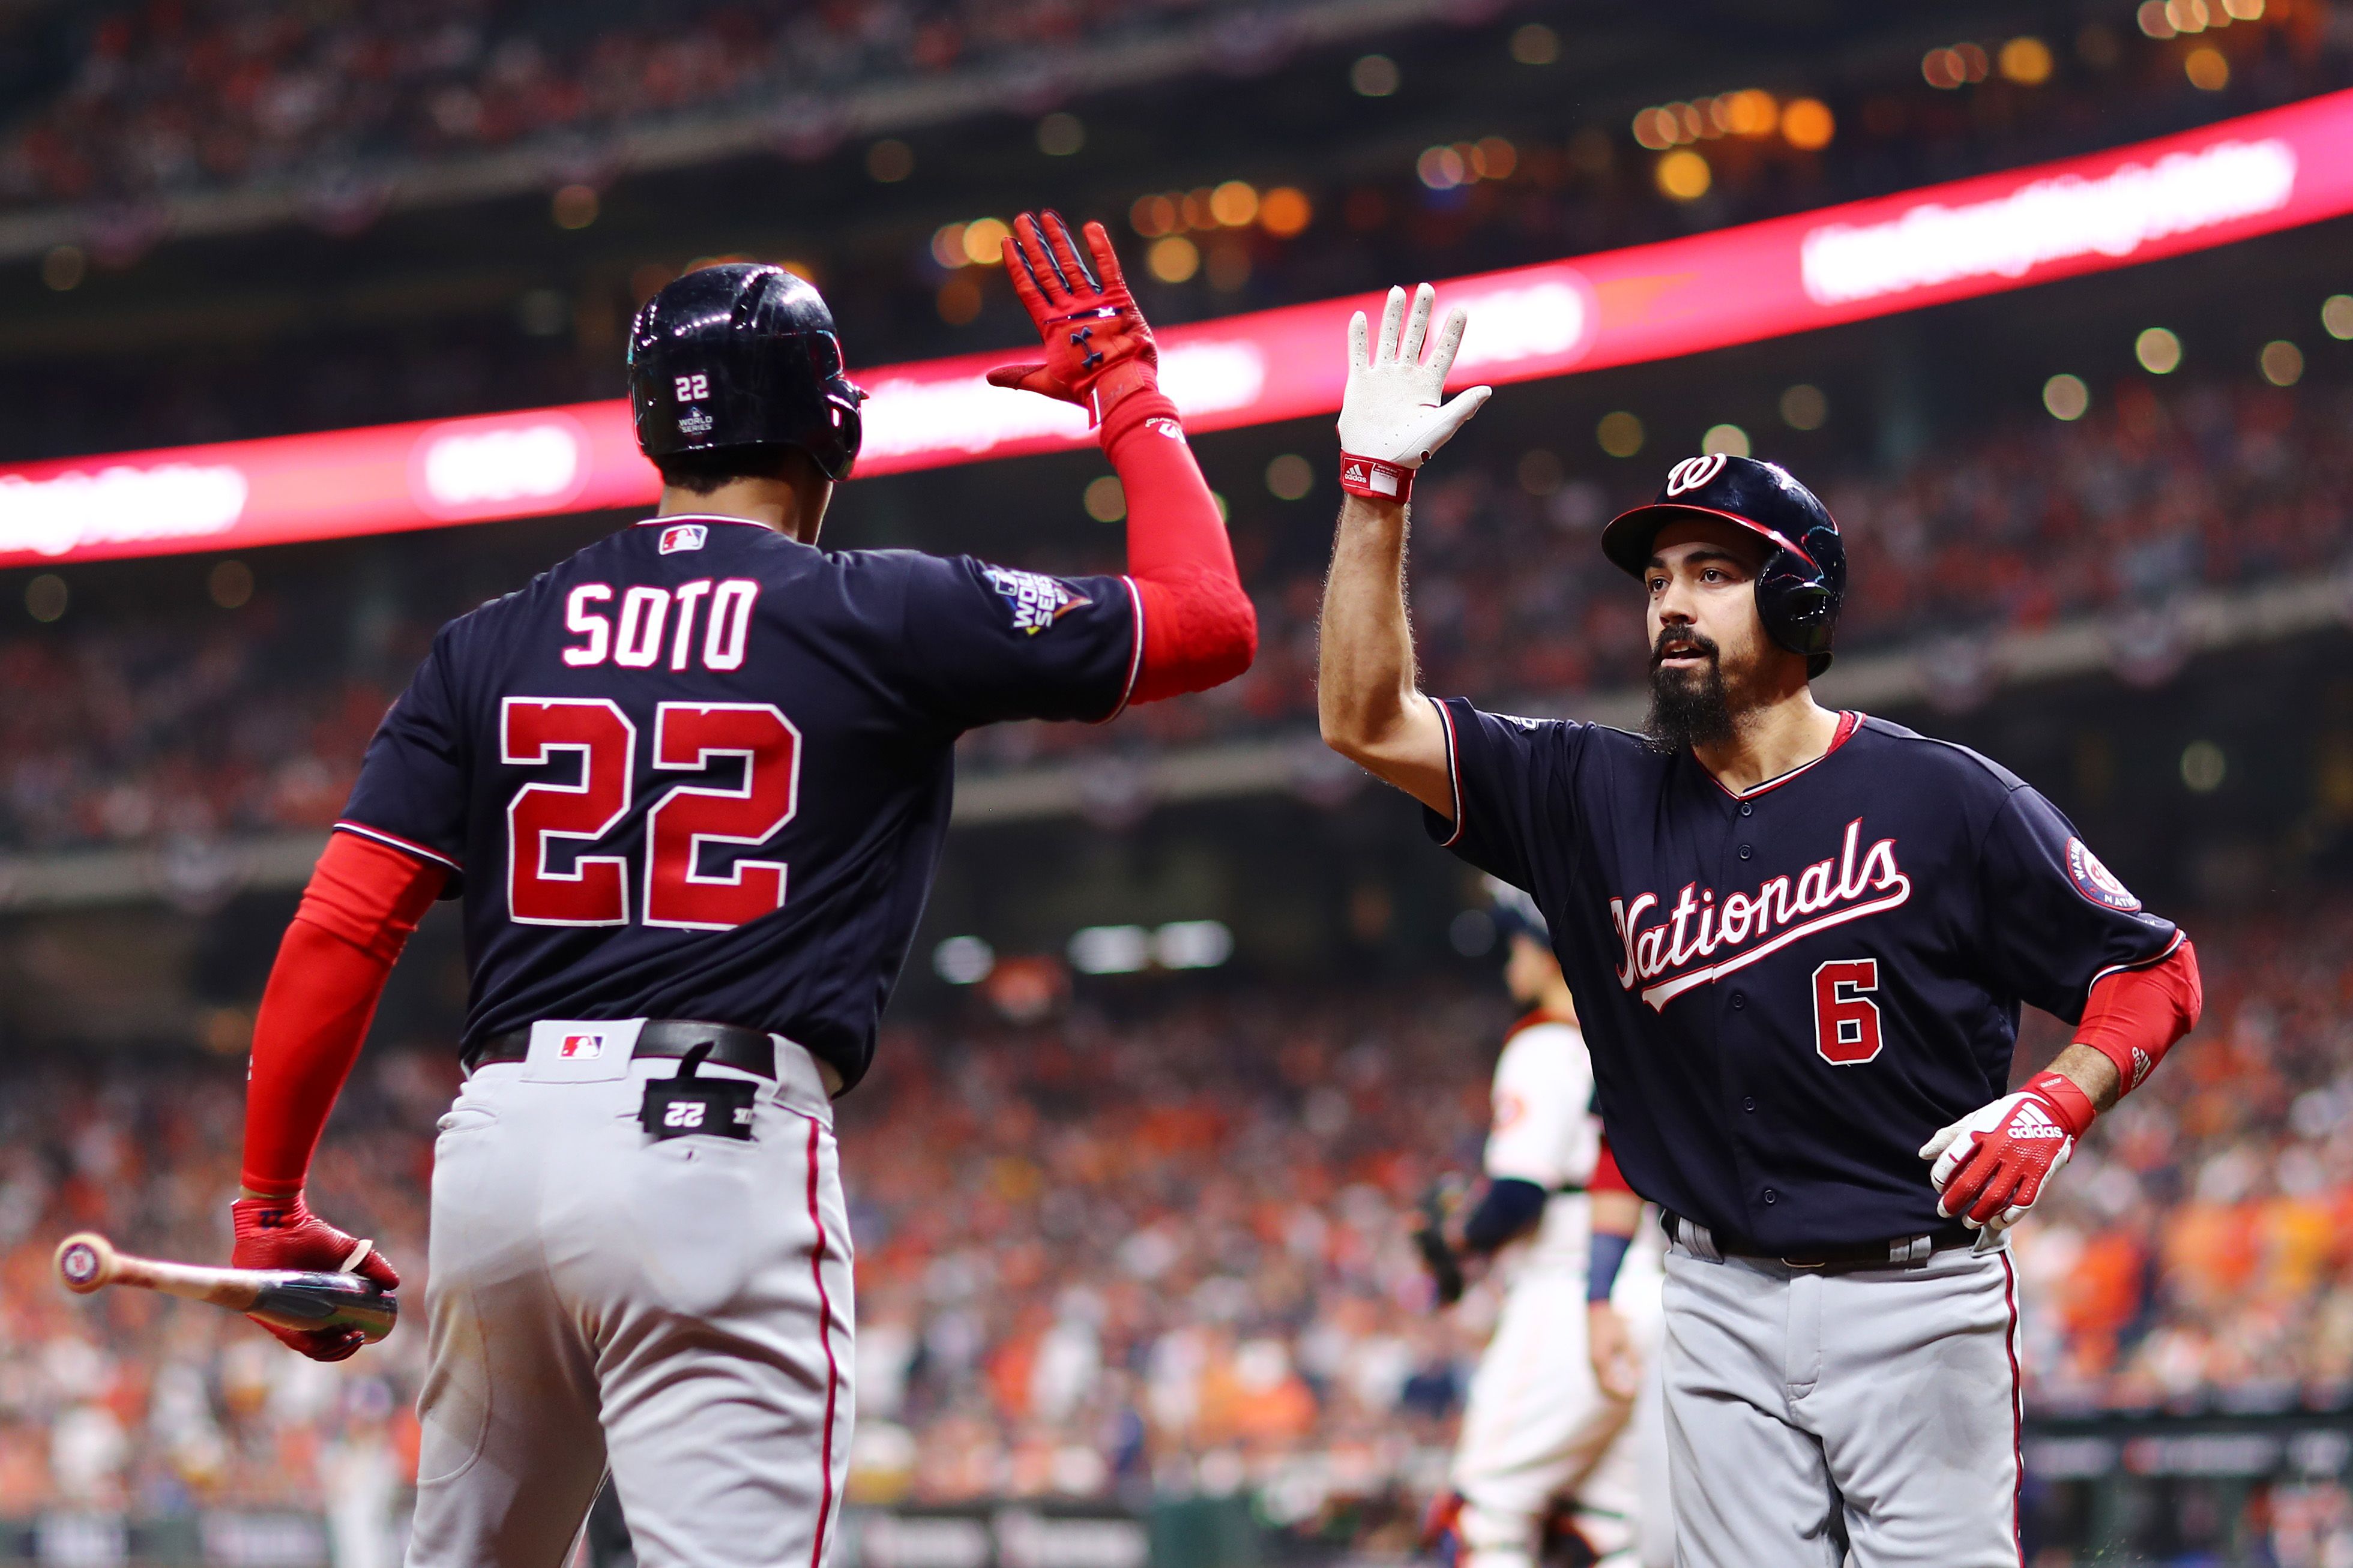 Nationals Beat The Astros 12-3 In Game 2 Of The 2019 World Series